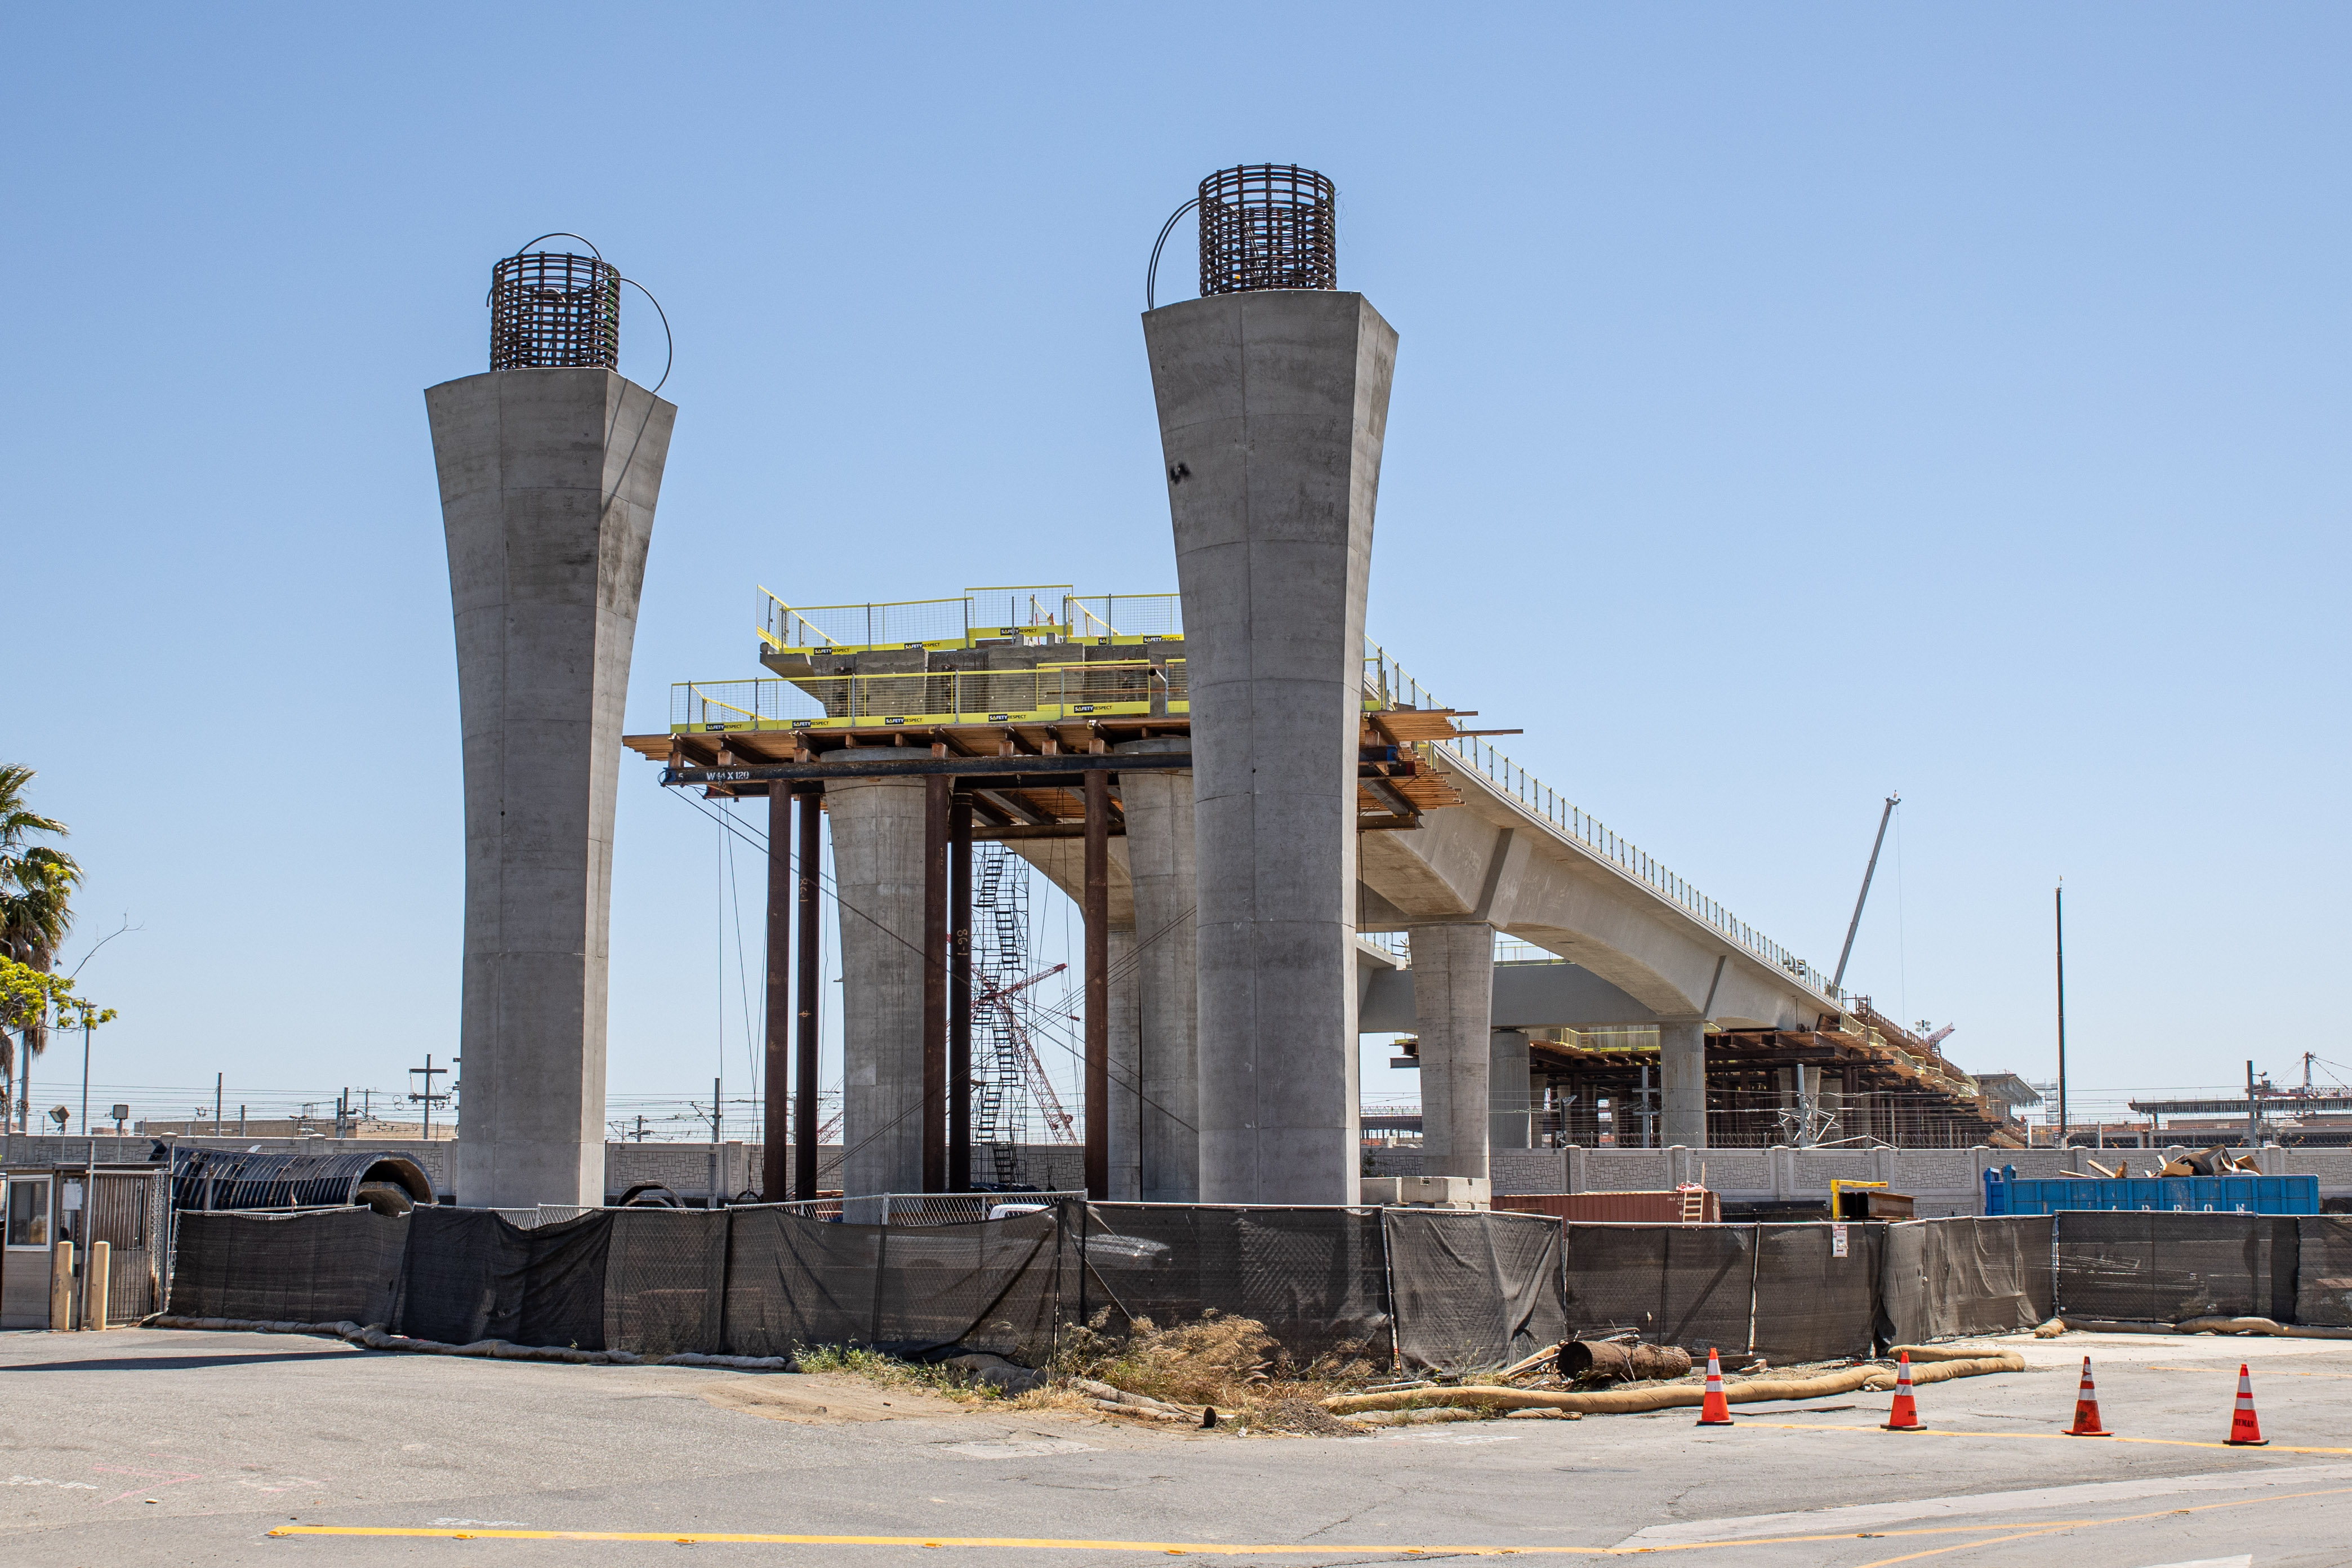 The columns along 96th Street stand ready for guideway construction to commence along the street. 